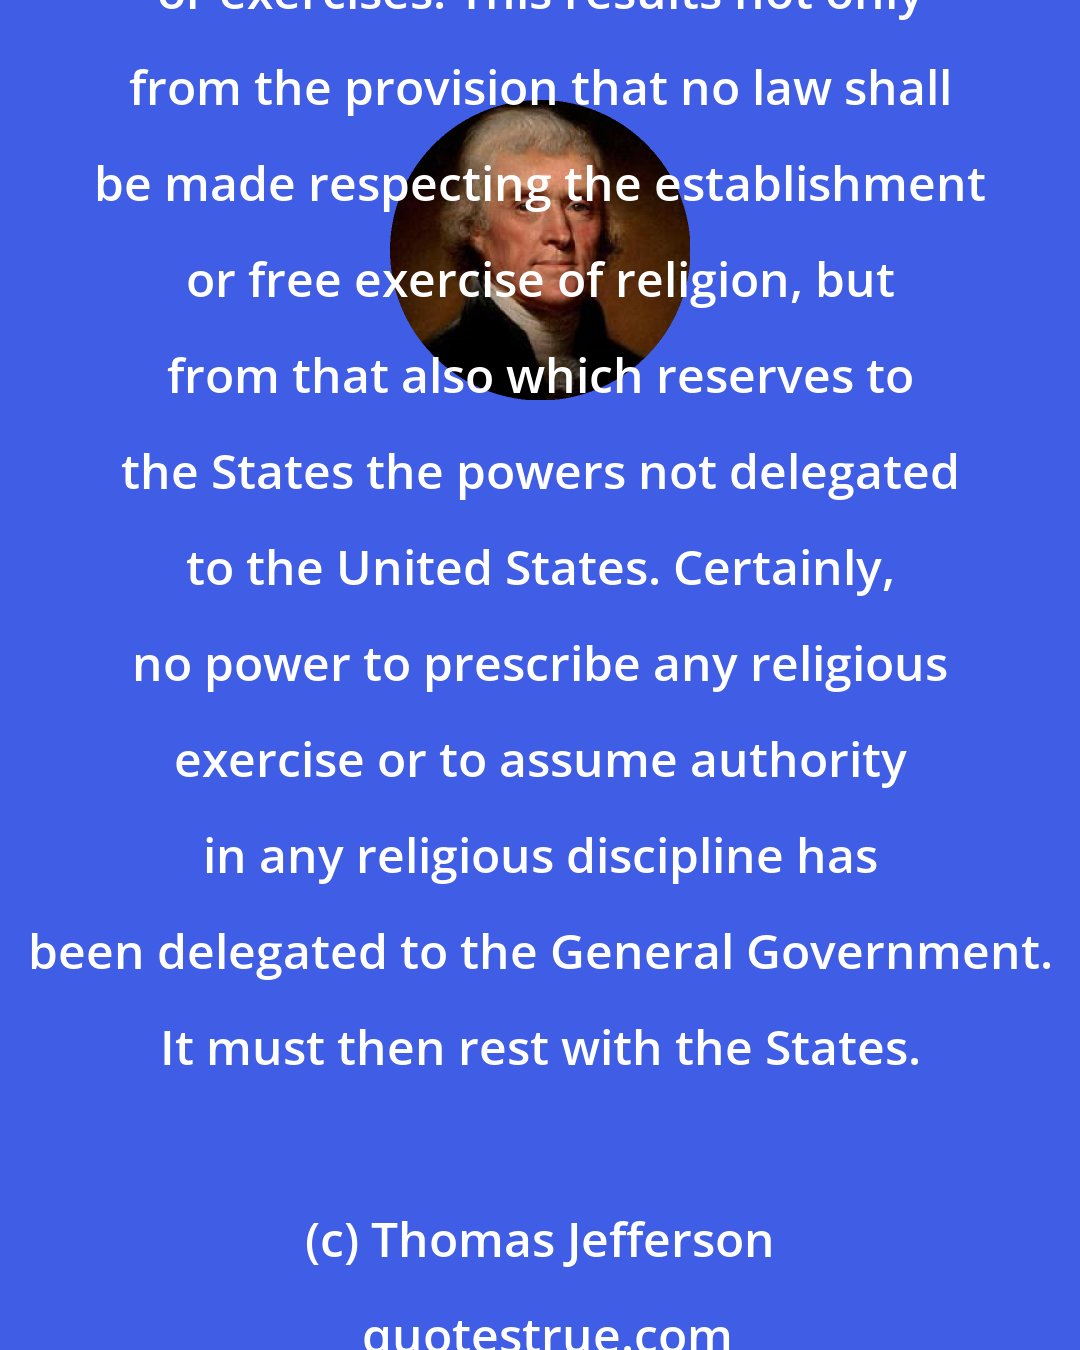 Thomas Jefferson: I consider the government of the United States as interdicted by the Constitution from intermeddling with religious institutions, their doctrines, discipline, or exercises. This results not only from the provision that no law shall be made respecting the establishment or free exercise of religion, but from that also which reserves to the States the powers not delegated to the United States. Certainly, no power to prescribe any religious exercise or to assume authority in any religious discipline has been delegated to the General Government. It must then rest with the States.